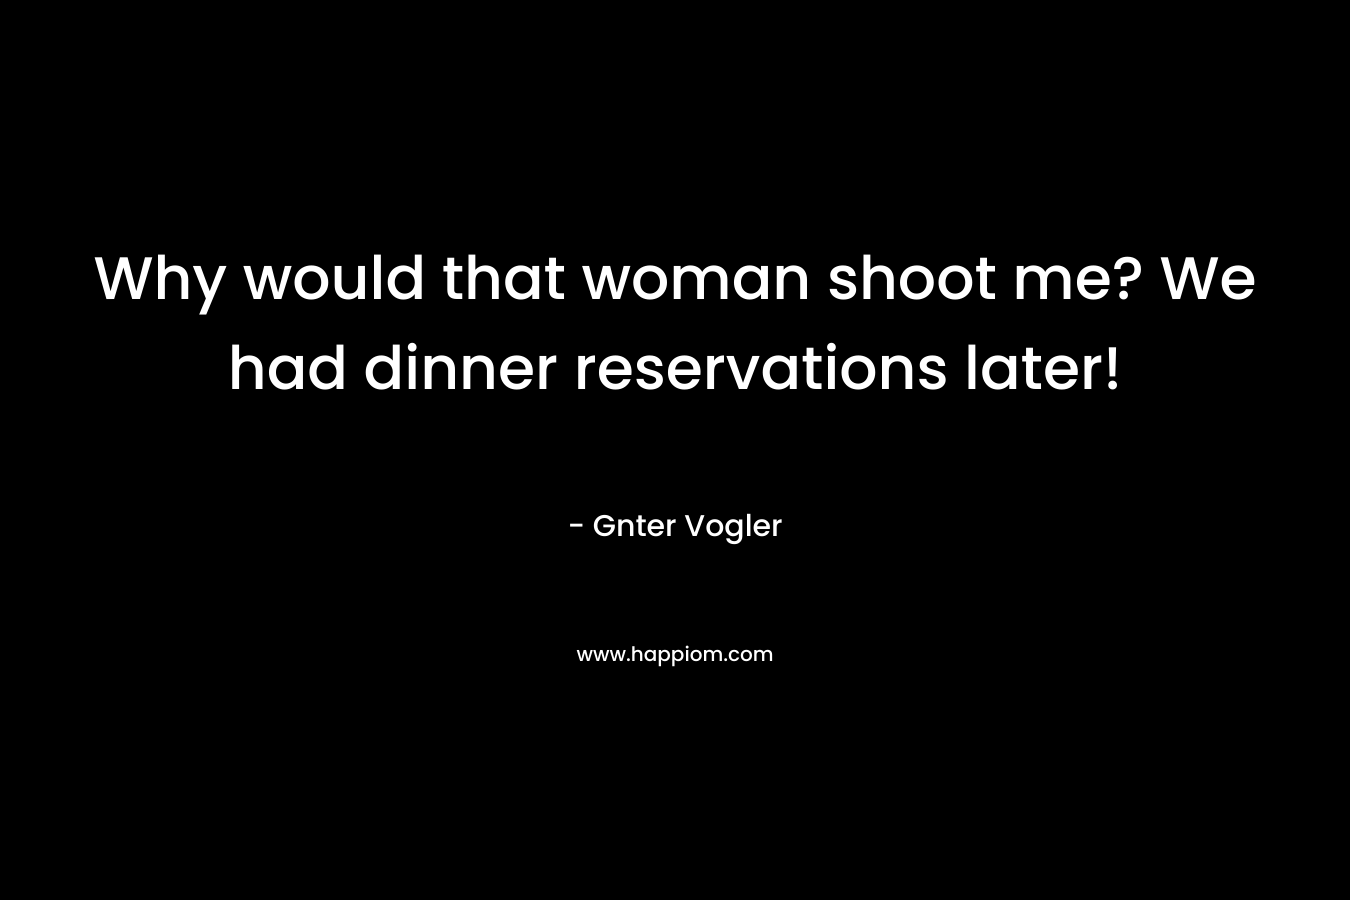 Why would that woman shoot me? We had dinner reservations later! – Gnter Vogler